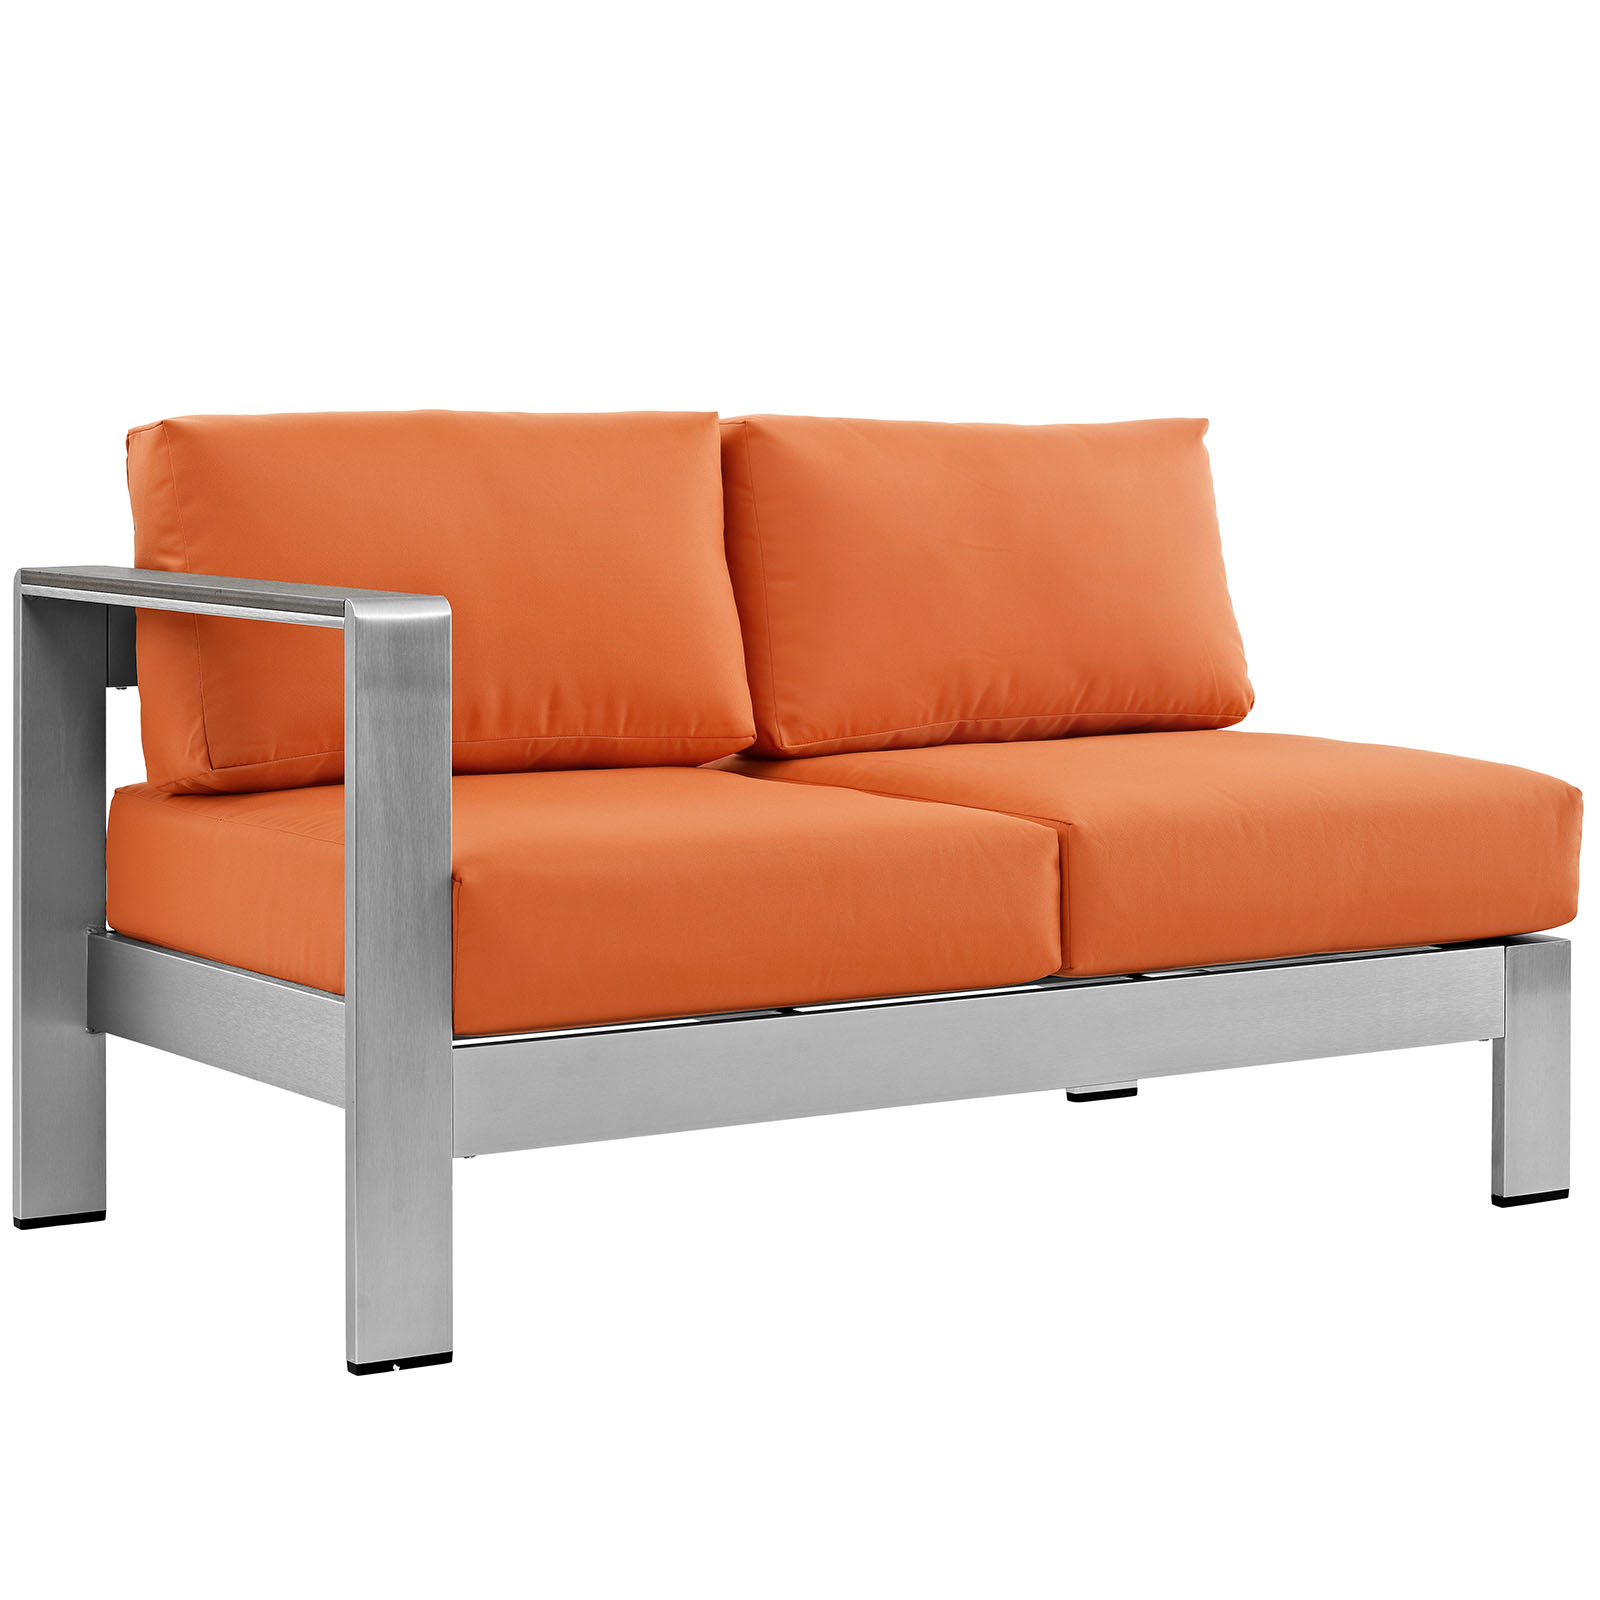 Modway Shore 7 Piece Outdoor Patio Aluminum Sectional Sofa Set in Silver Orange - image 3 of 8